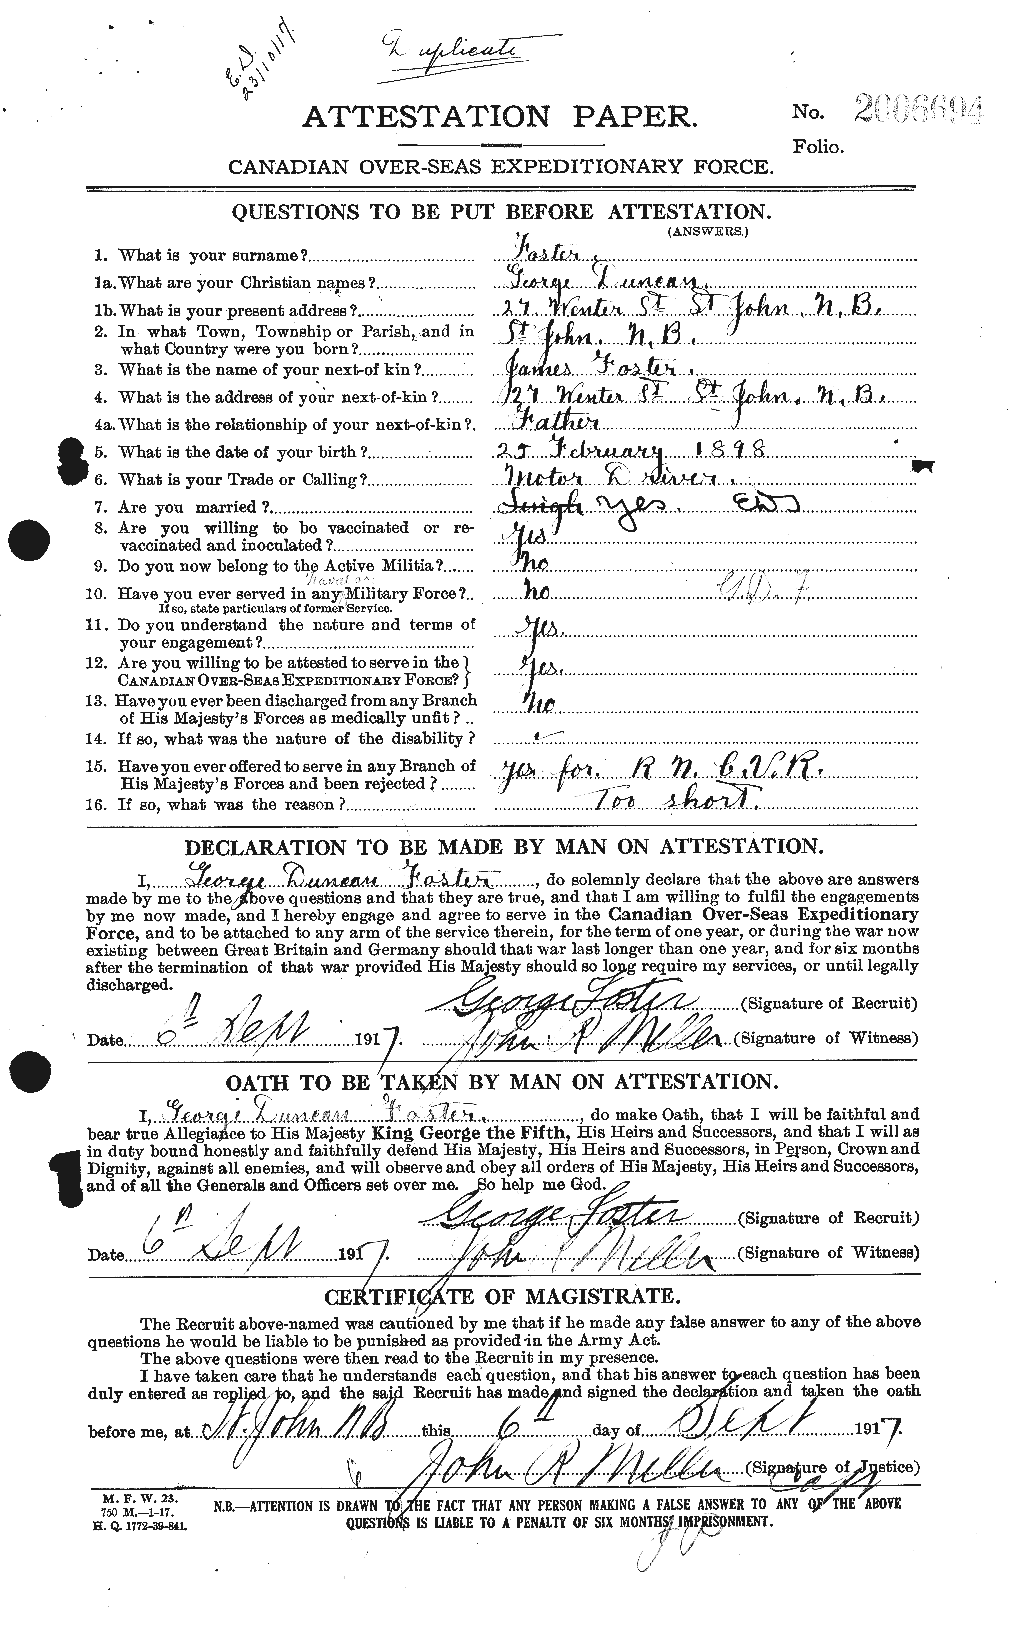 Personnel Records of the First World War - CEF 330684a